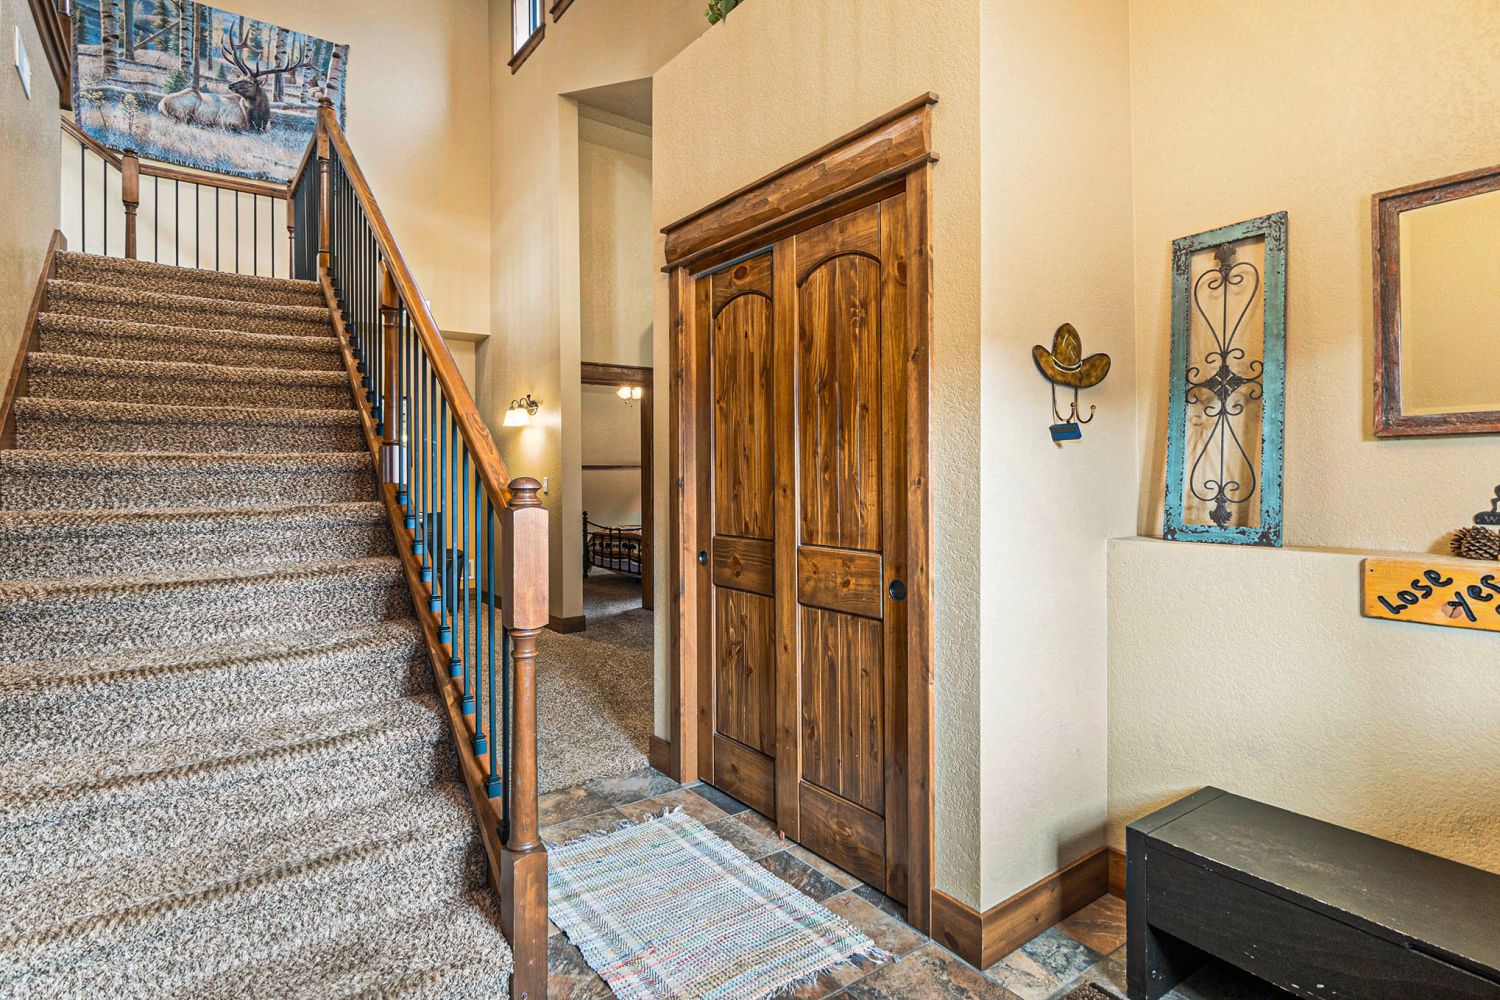 Timber Mountain Retreat - Entryway into the home, carpeted stairs up to main living/dining area.